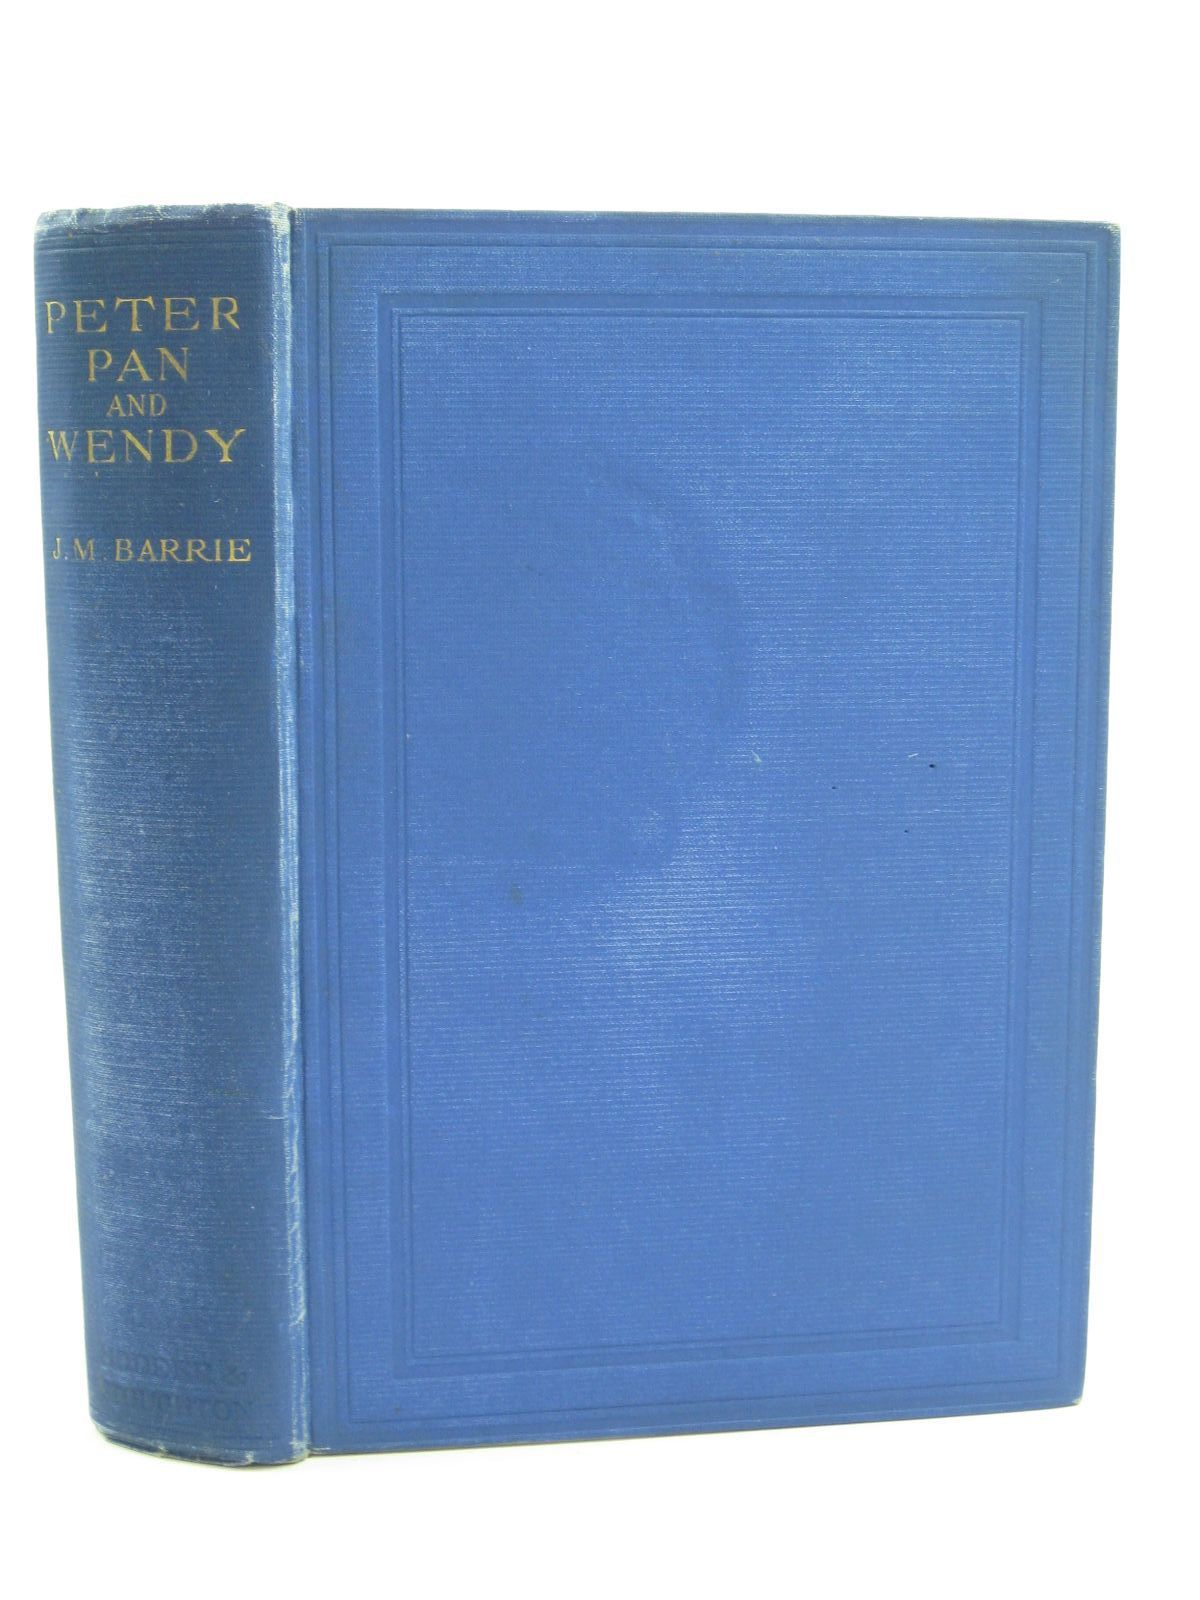 Photo of PETER PAN AND WENDY written by Barrie, J.M. illustrated by Attwell, Mabel Lucie published by Hodder &amp; Stoughton (STOCK CODE: 1406751)  for sale by Stella & Rose's Books